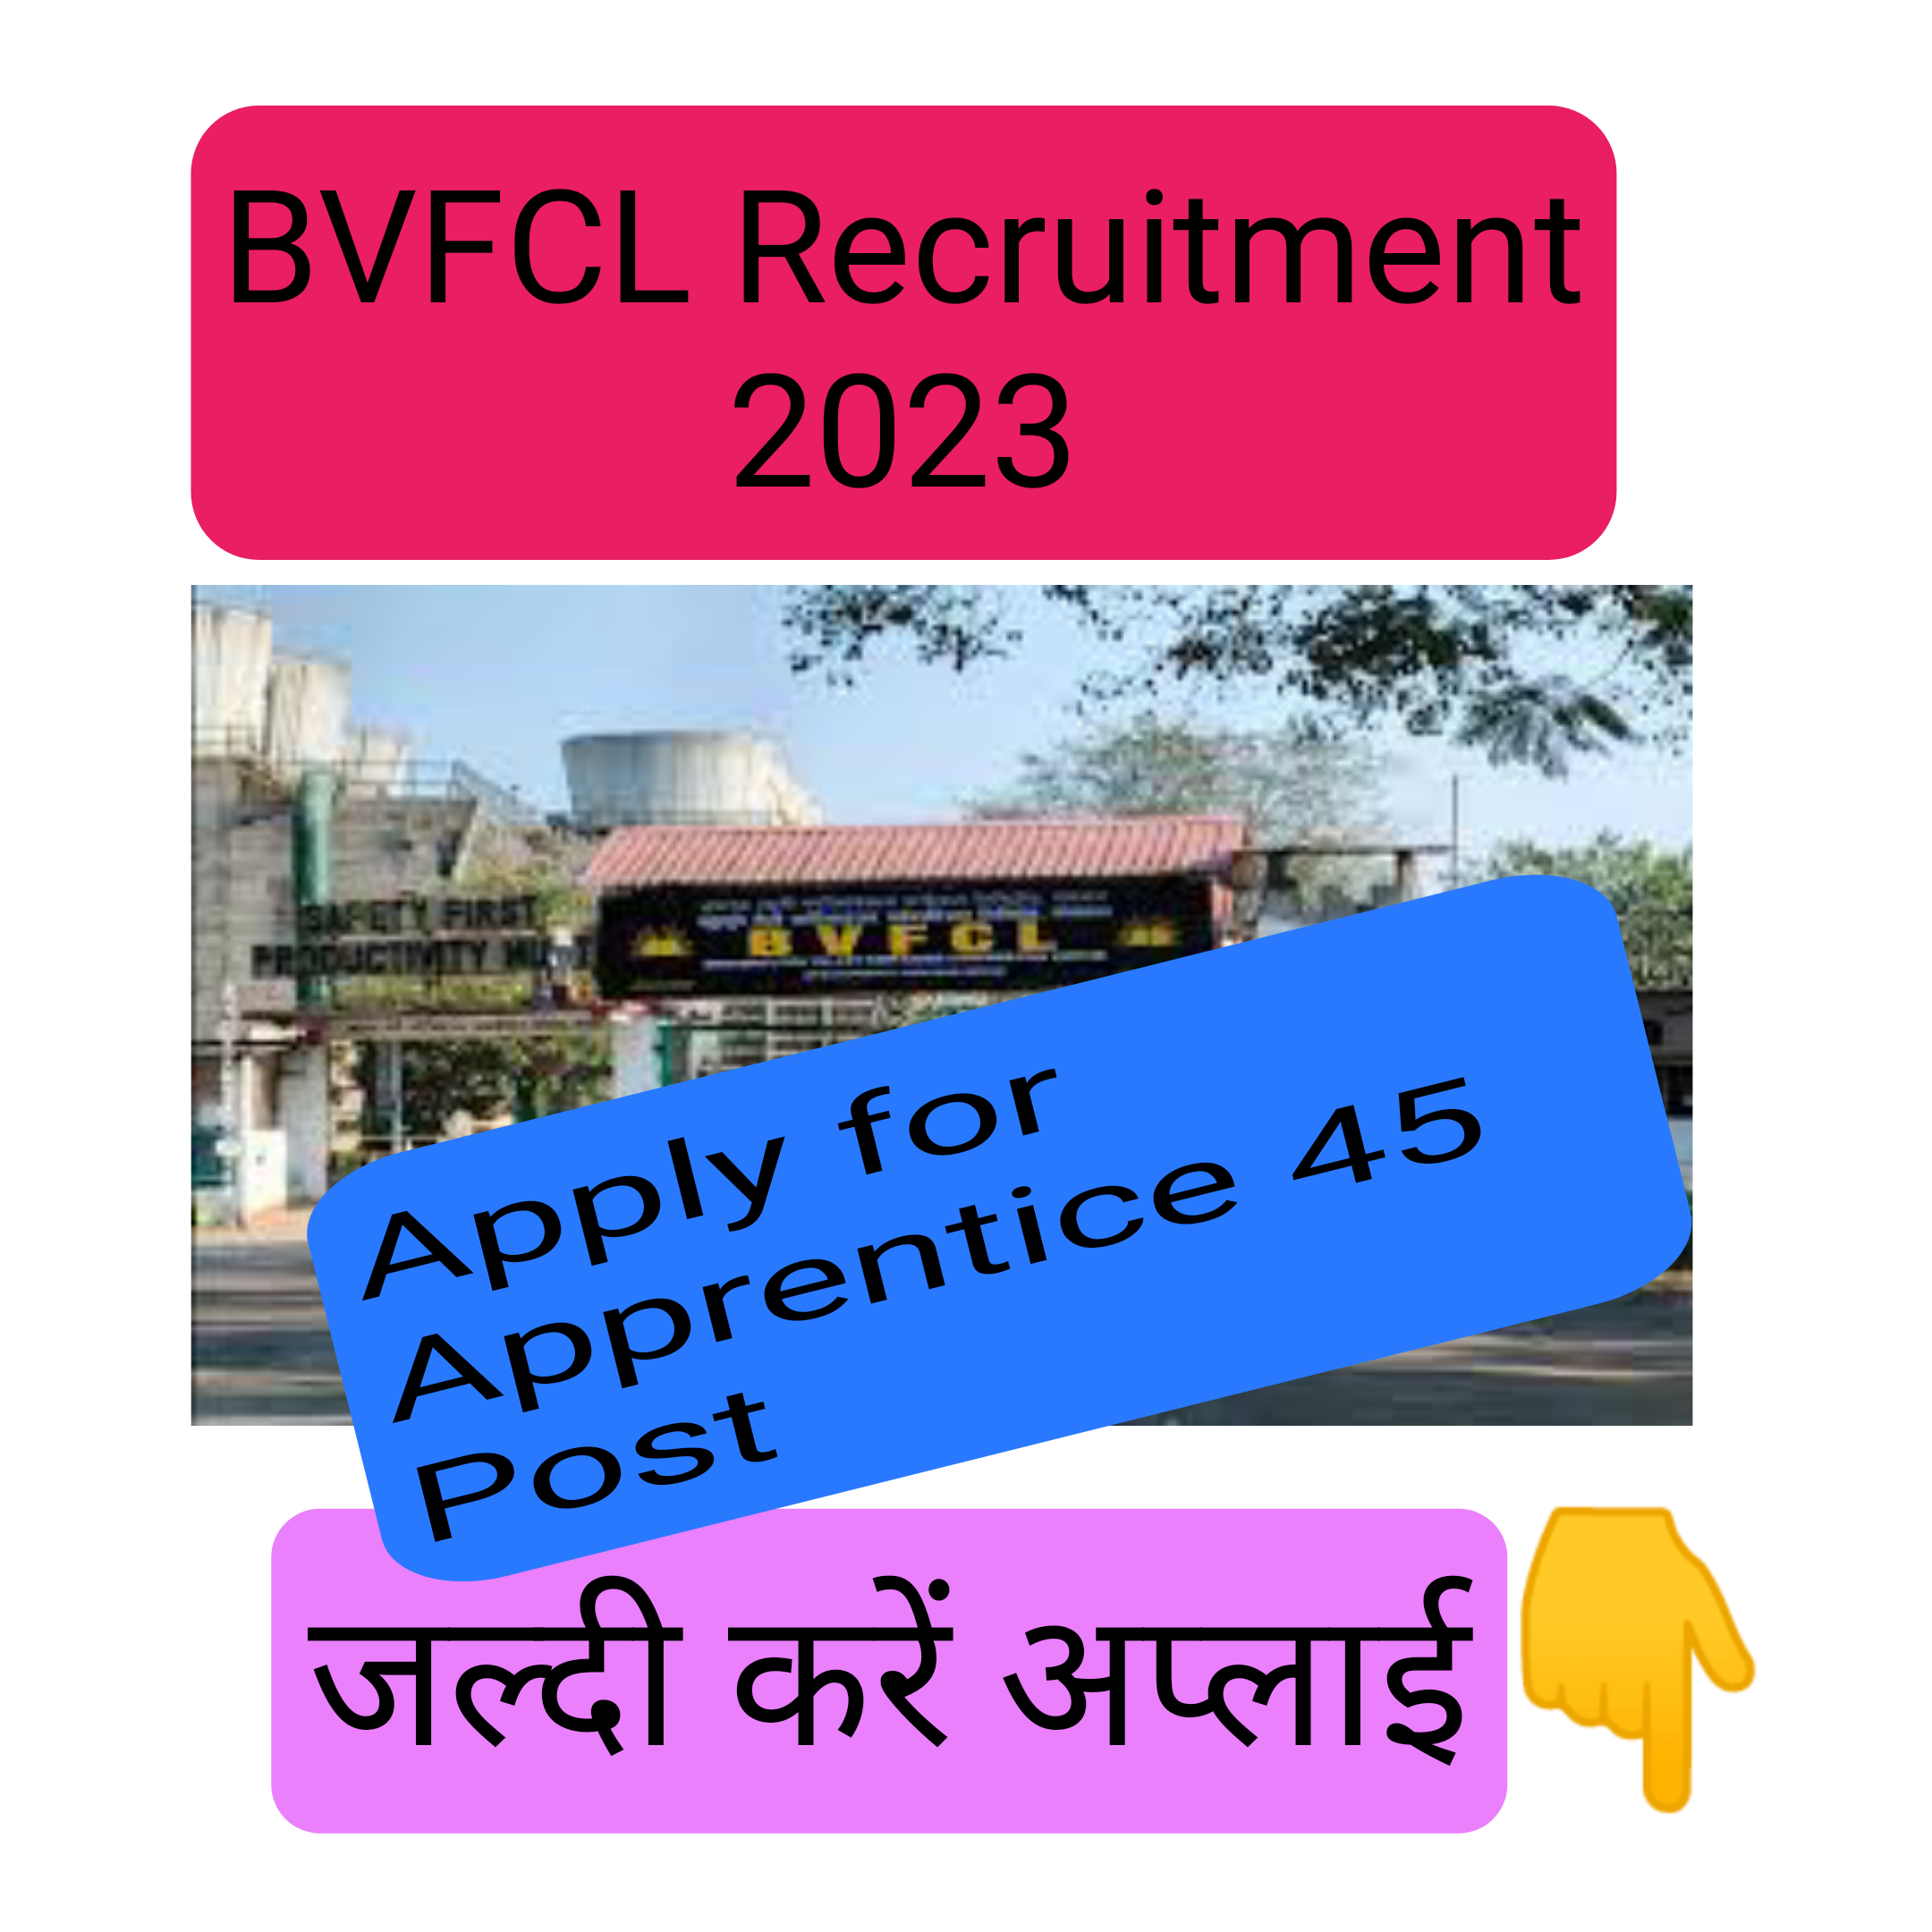 BVFCL Recruitment 2023 |Apply for Apprentice 45 Post